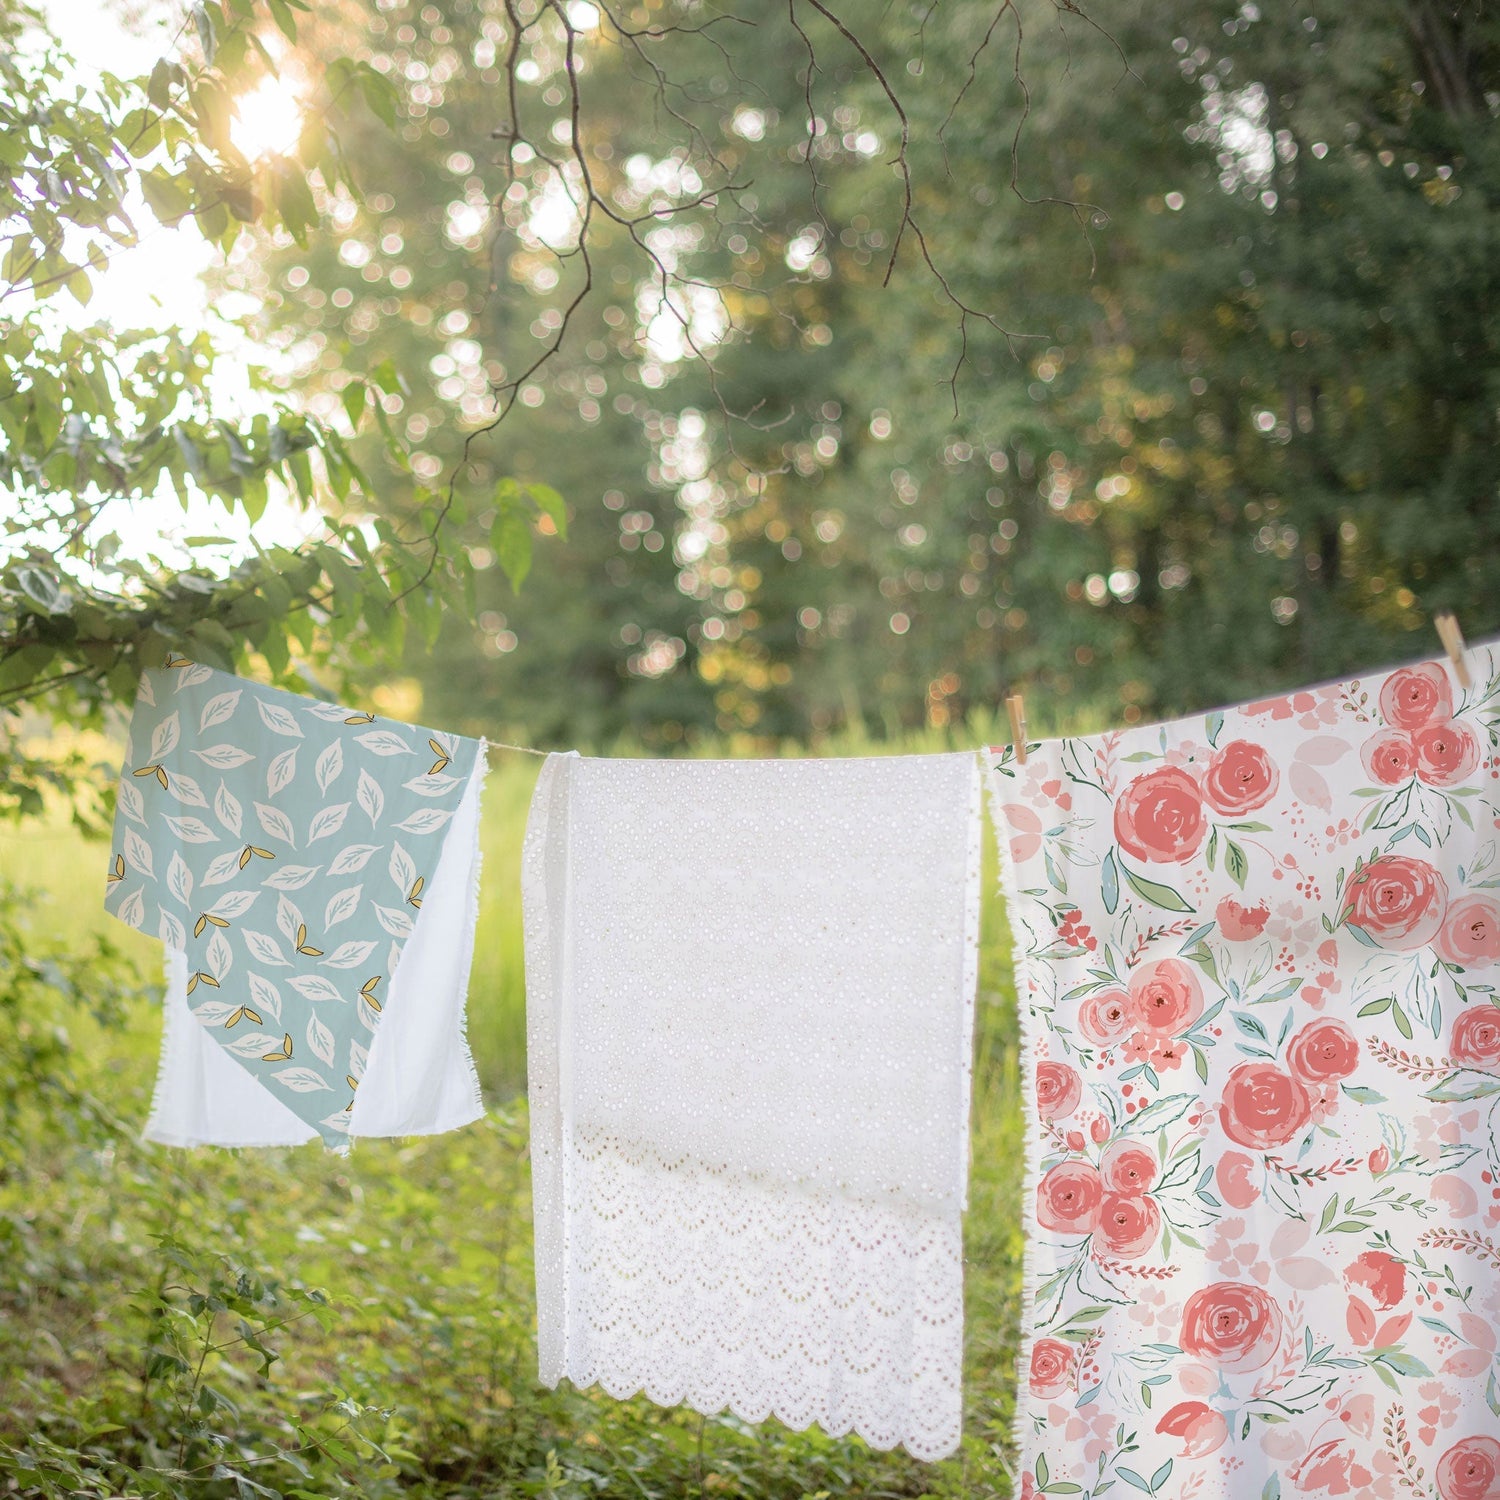 Five Patch Design Full Bloom fabric collection